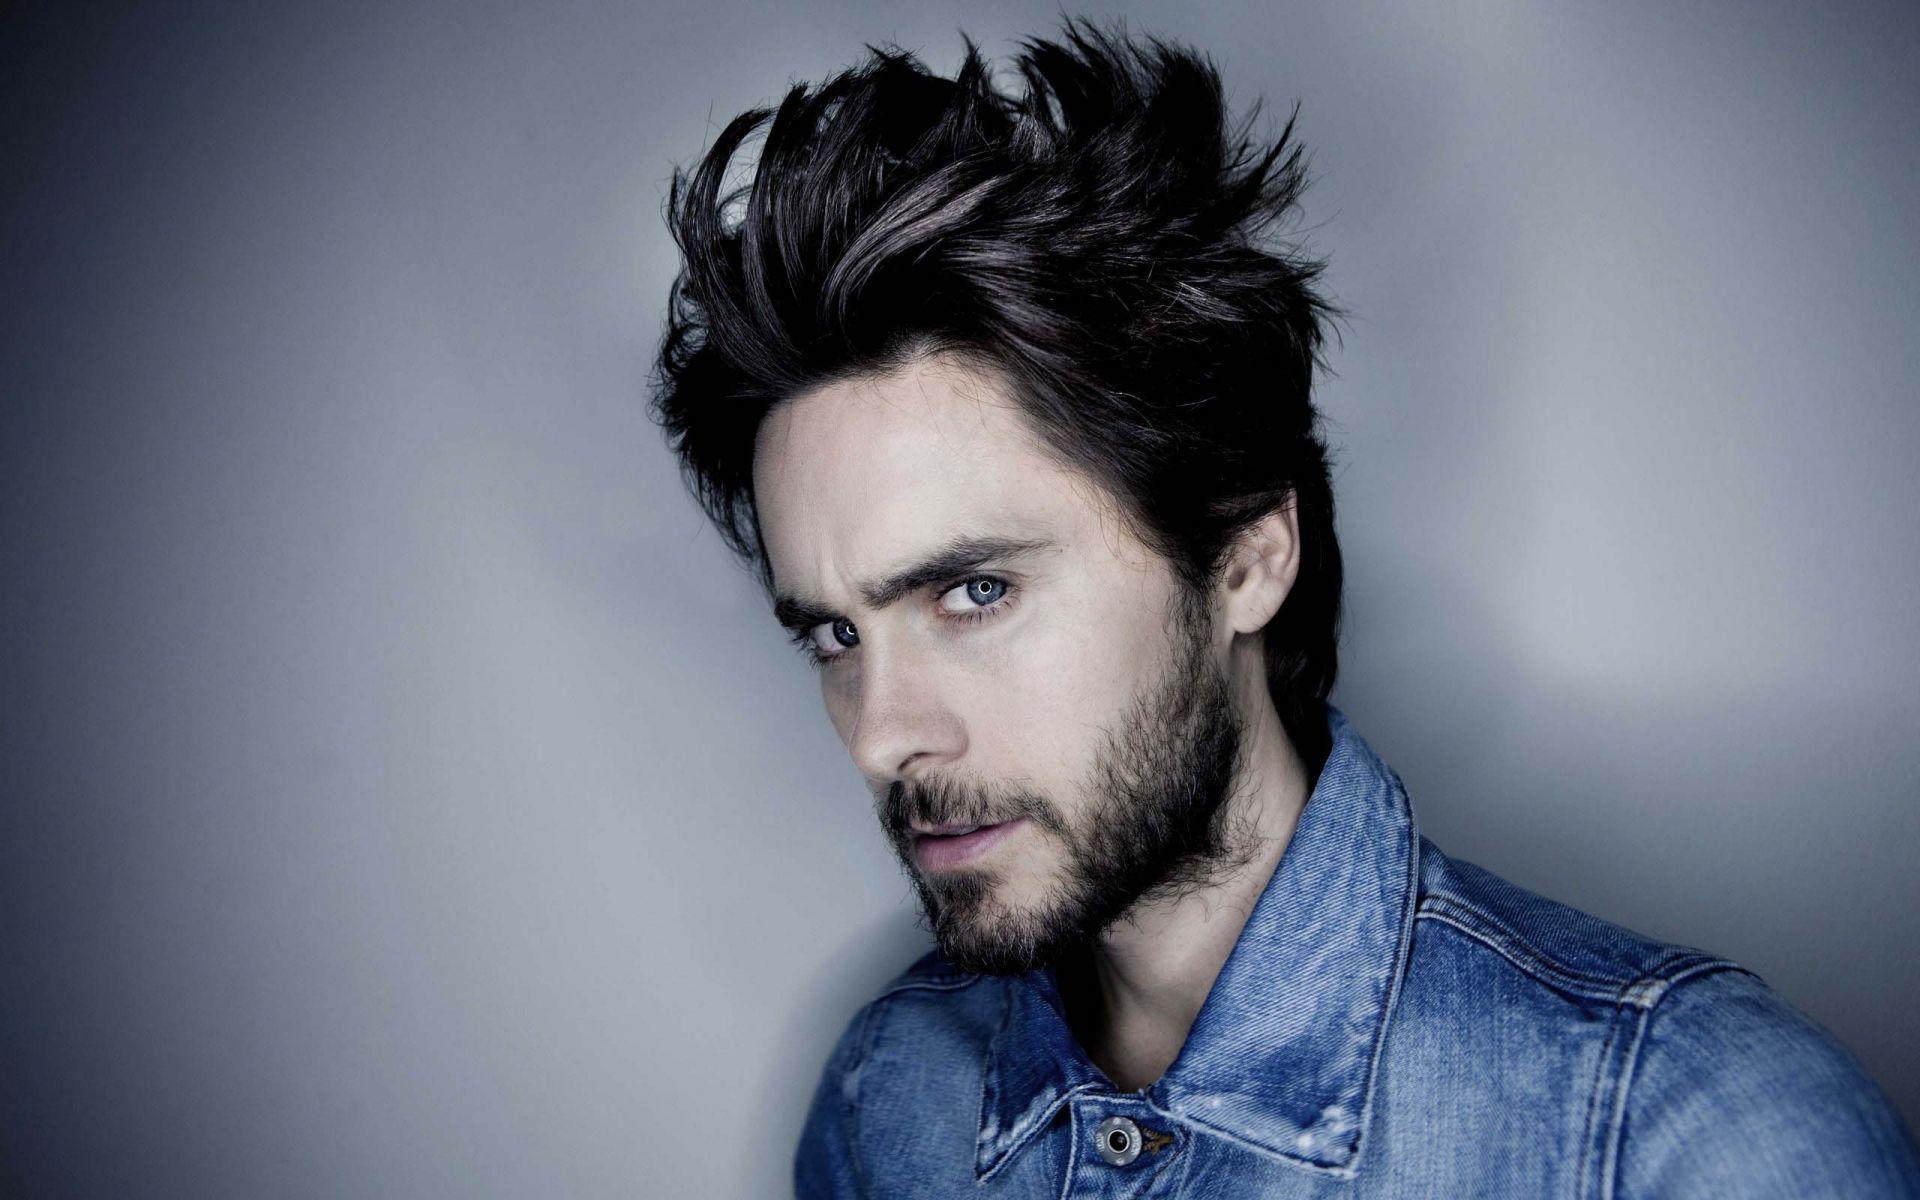 Stylish Jared Leto. HD Hollywood Actors Wallpaper for Mobile